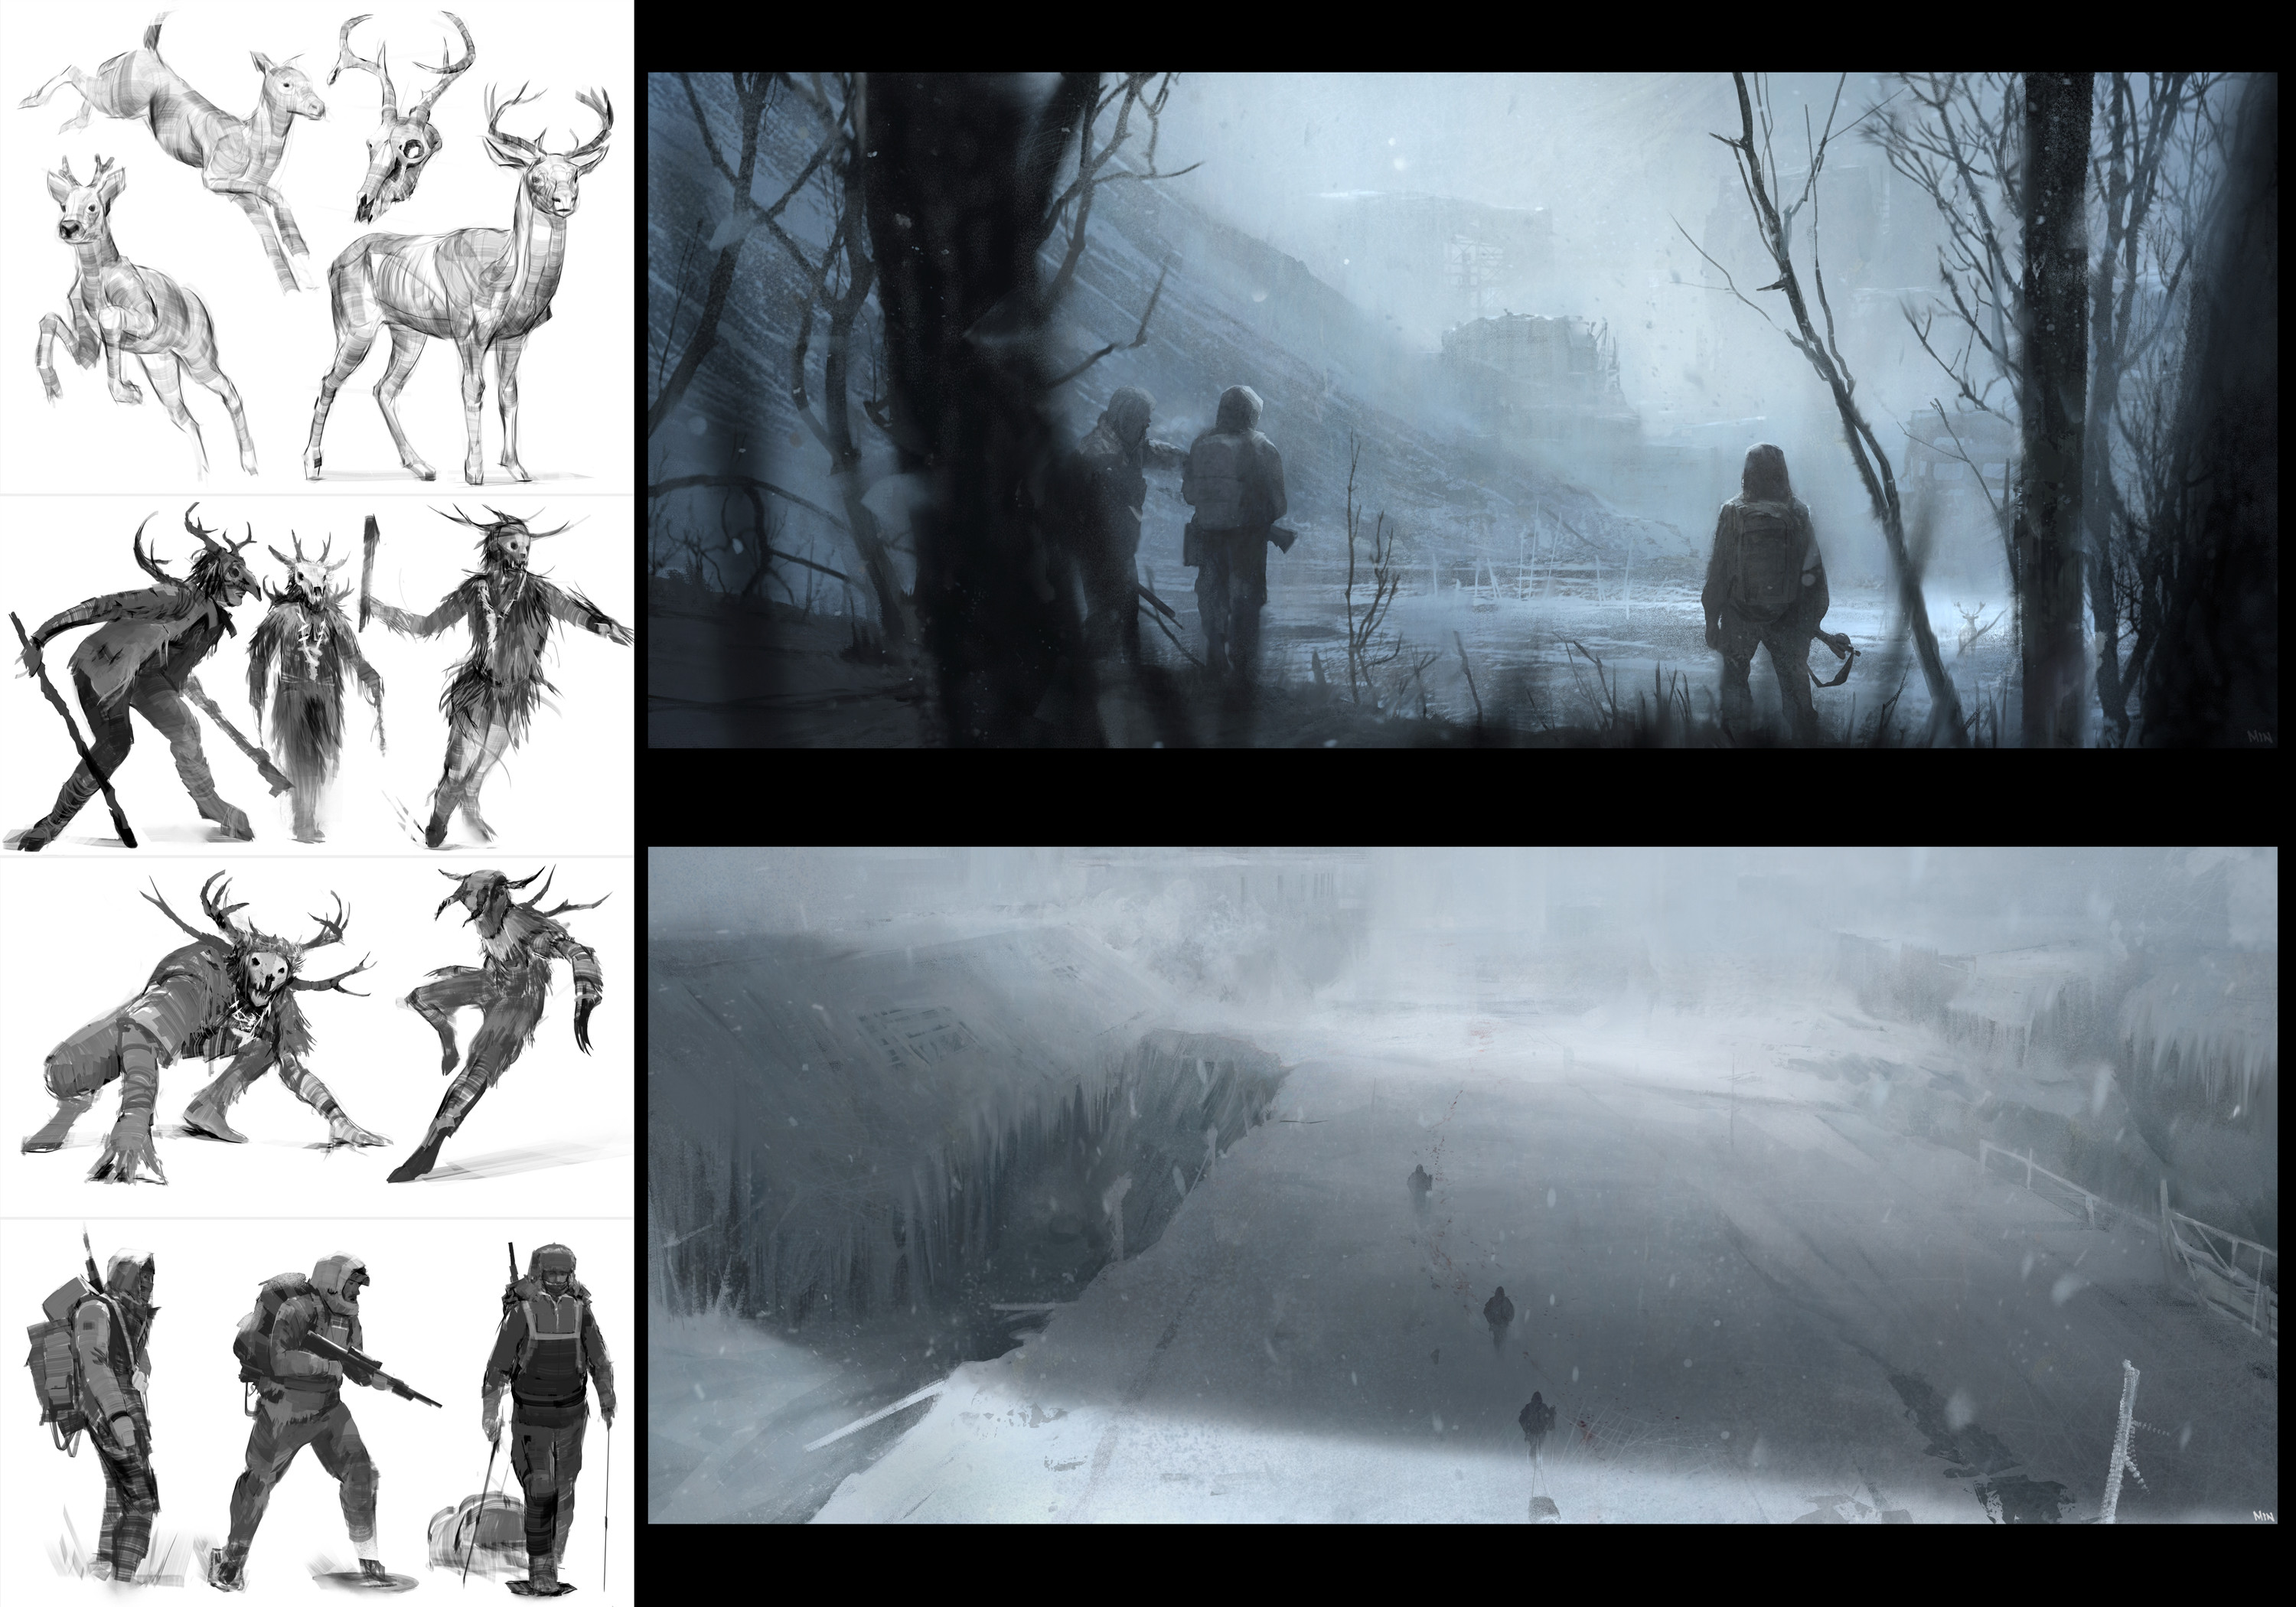 Early character and scene sketches.